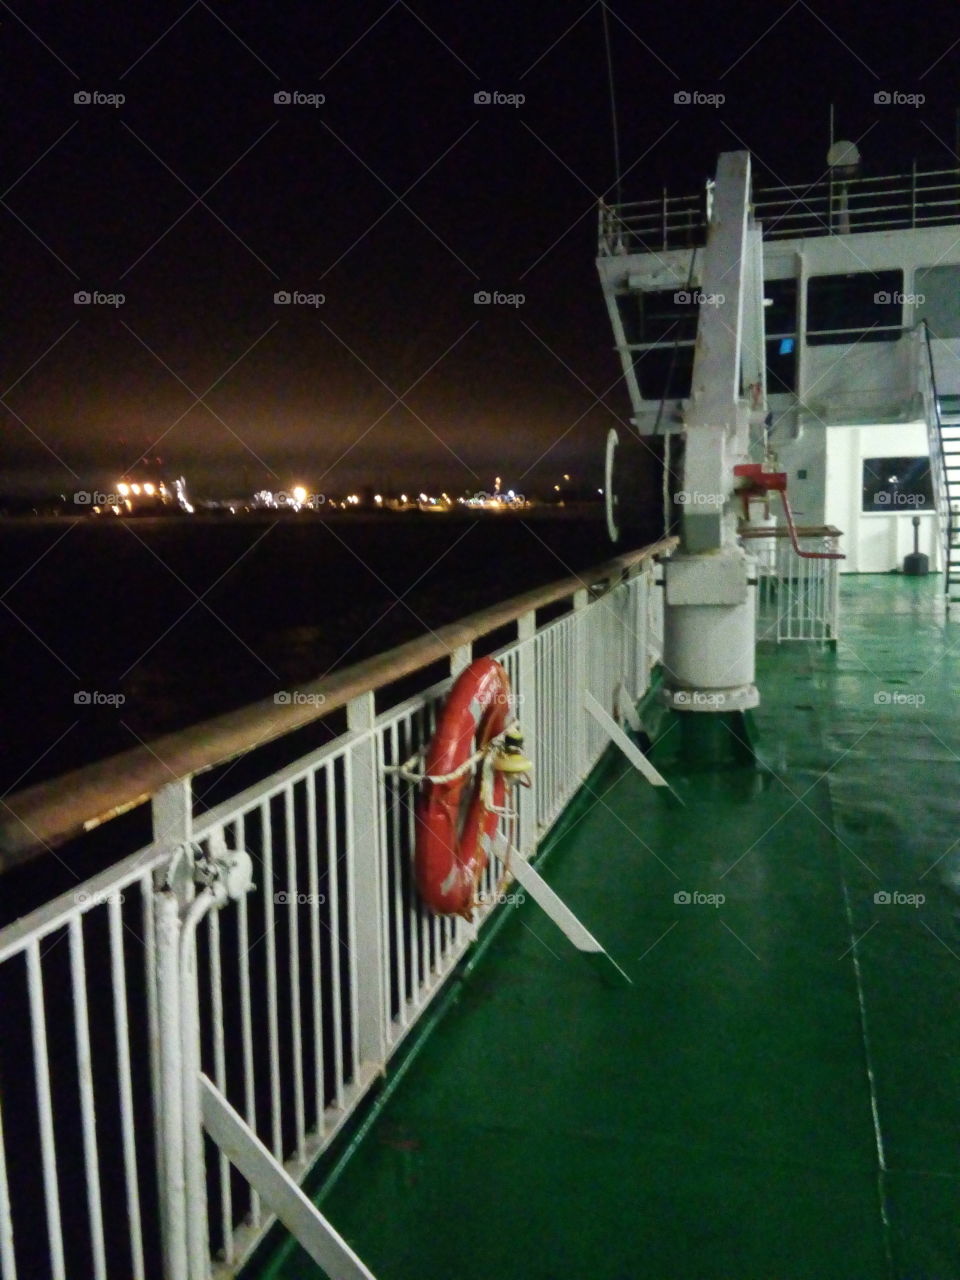 on the ferry from Finland to Sweden